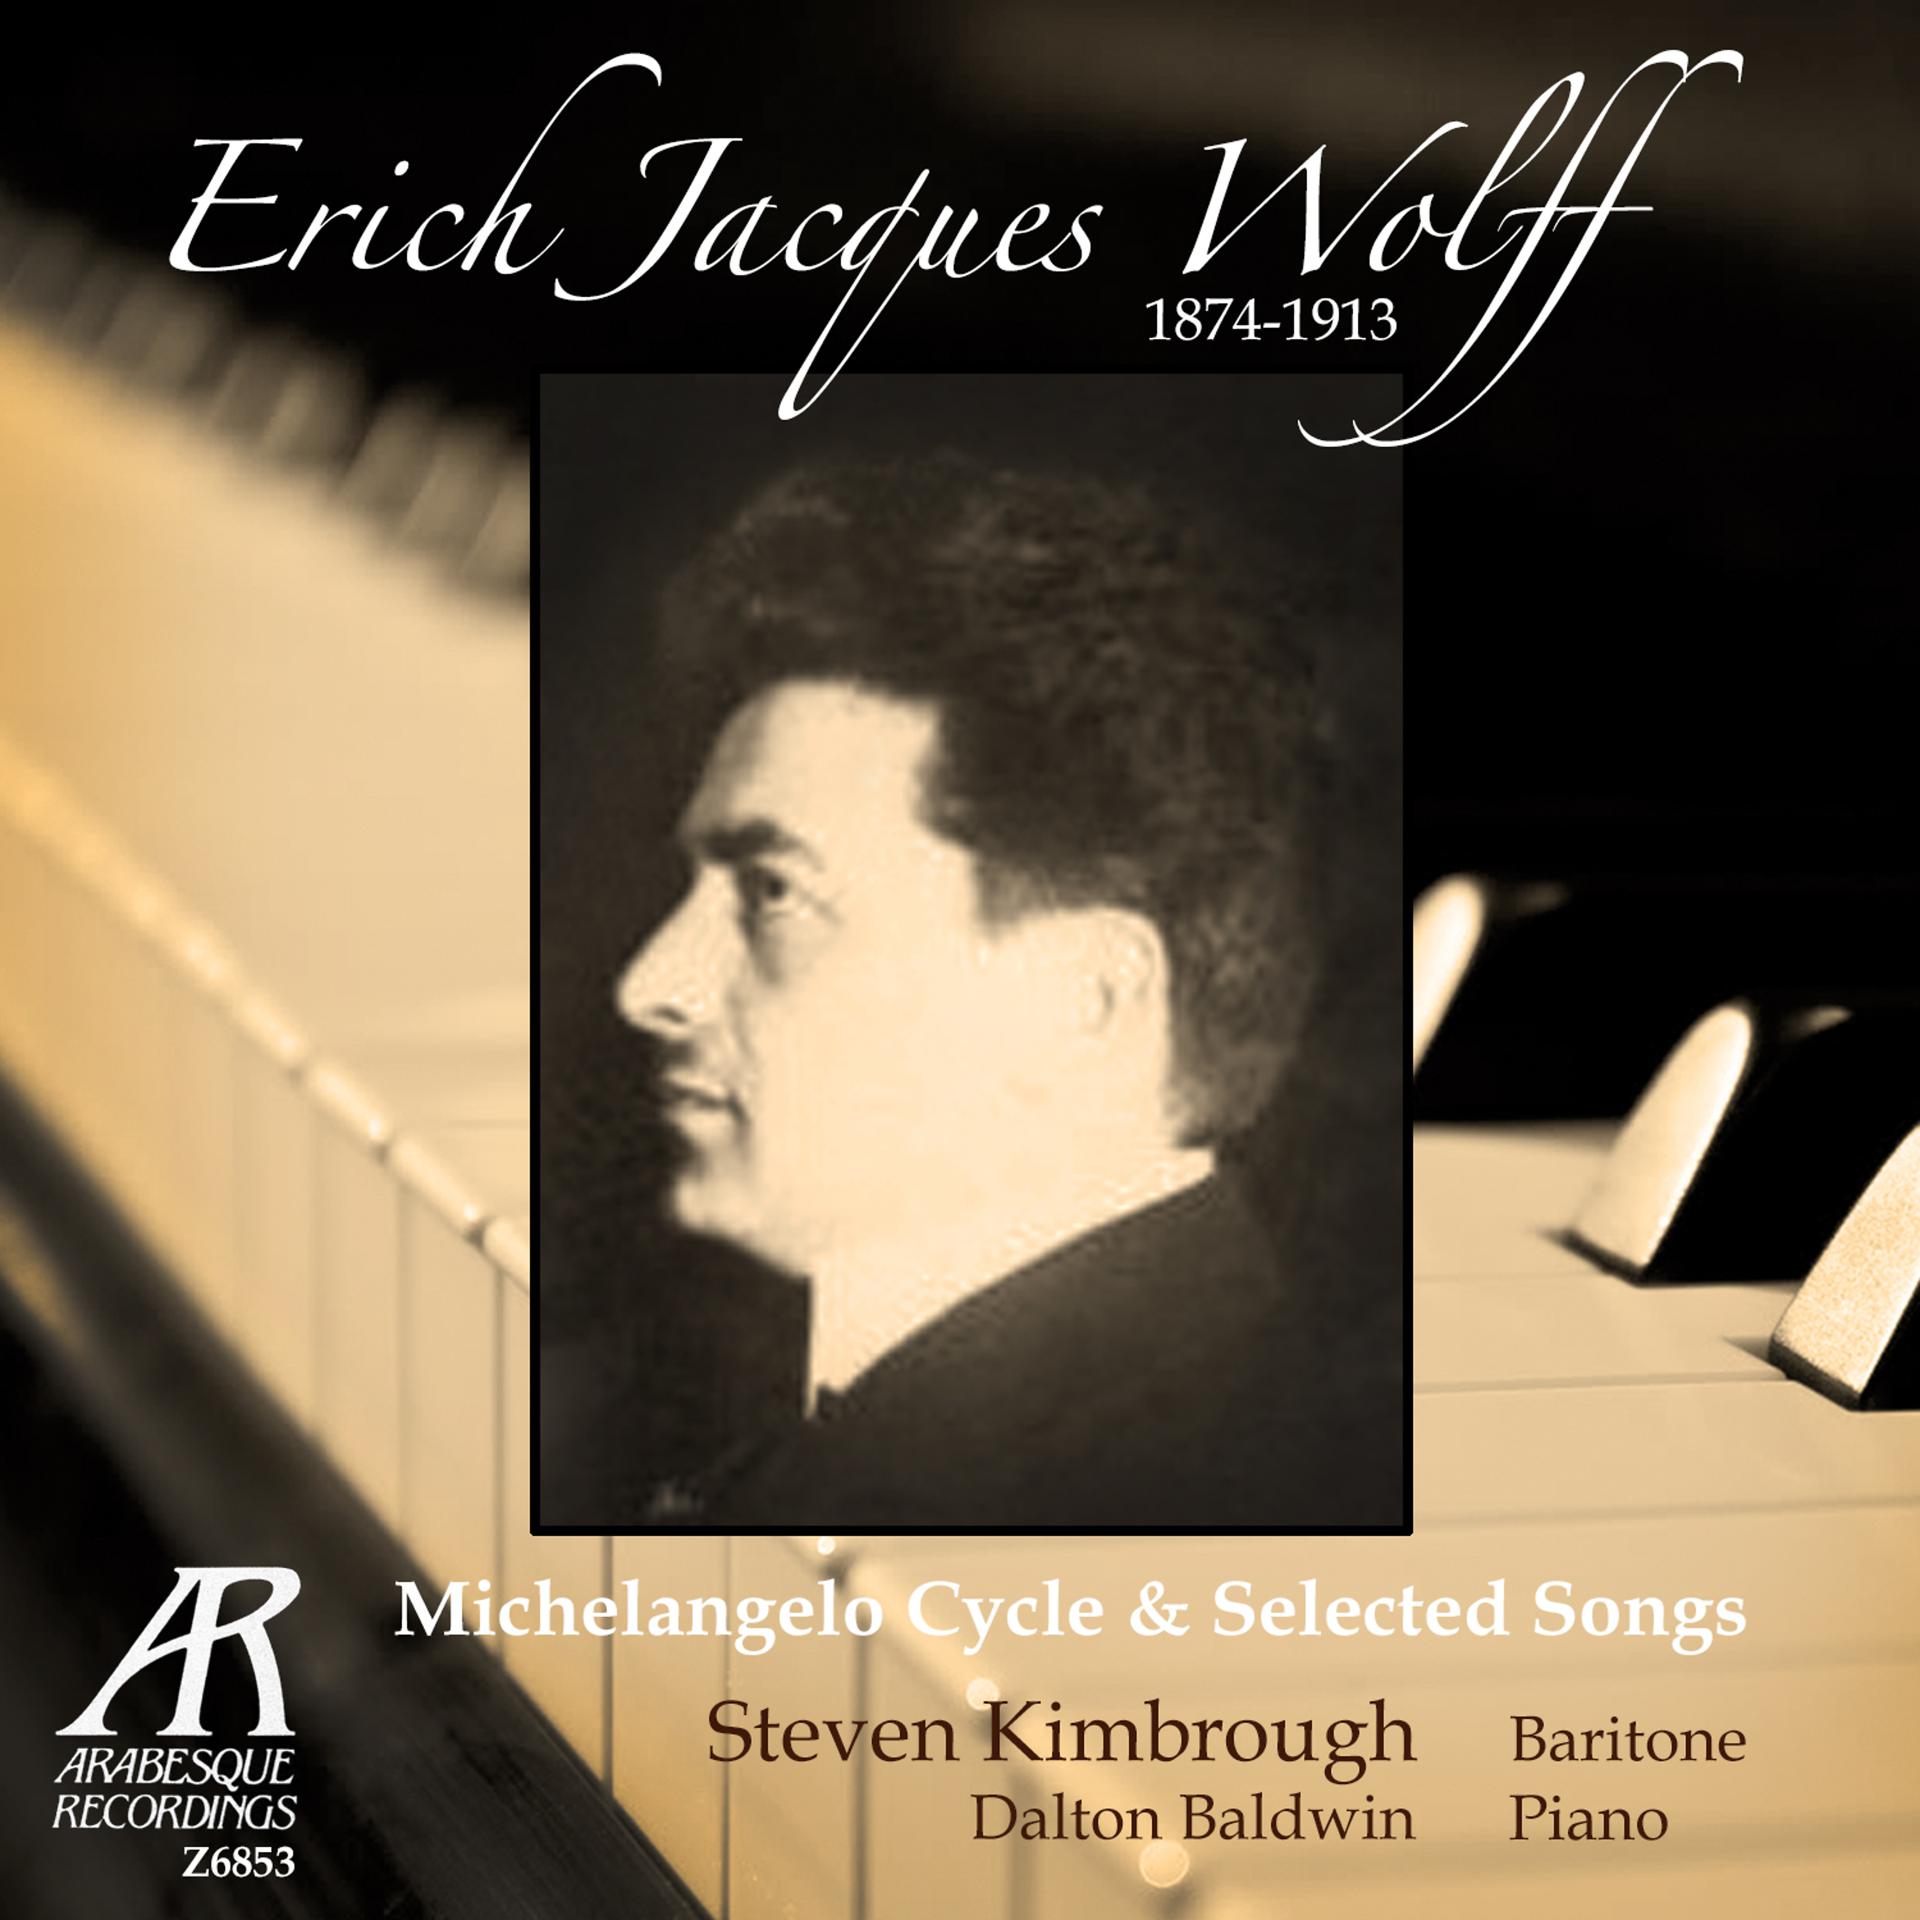 Постер альбома Erich Jacques Wolff:  Michelangelo-Zyklus und ausgewählte Lieder - Michelangelo Cycle and Selected Songs